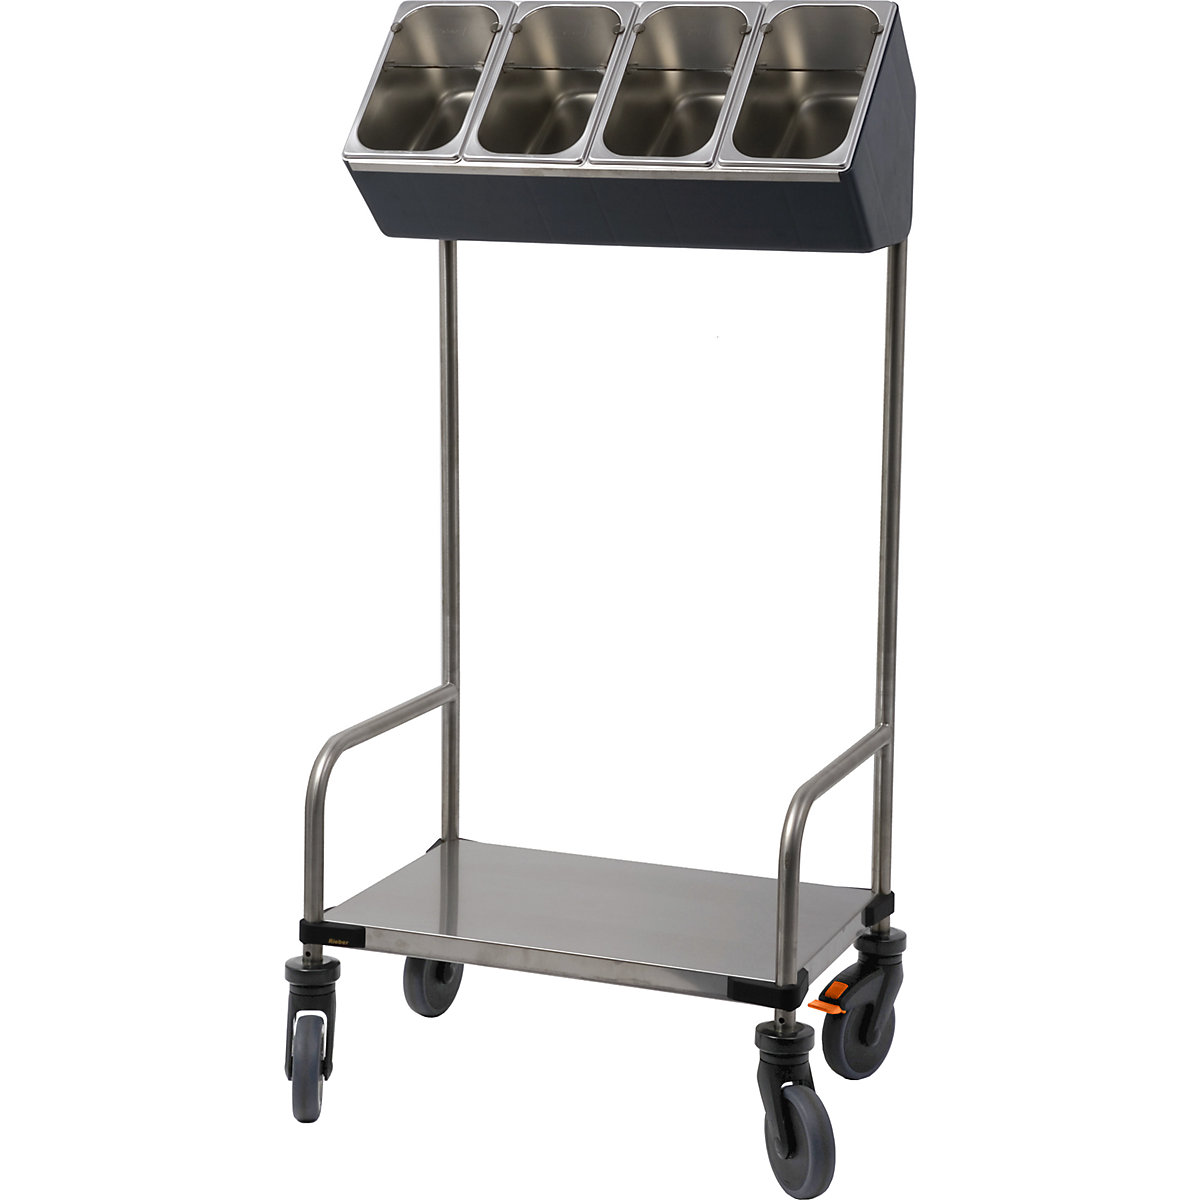 Stainless steel tray and cutlery trolley